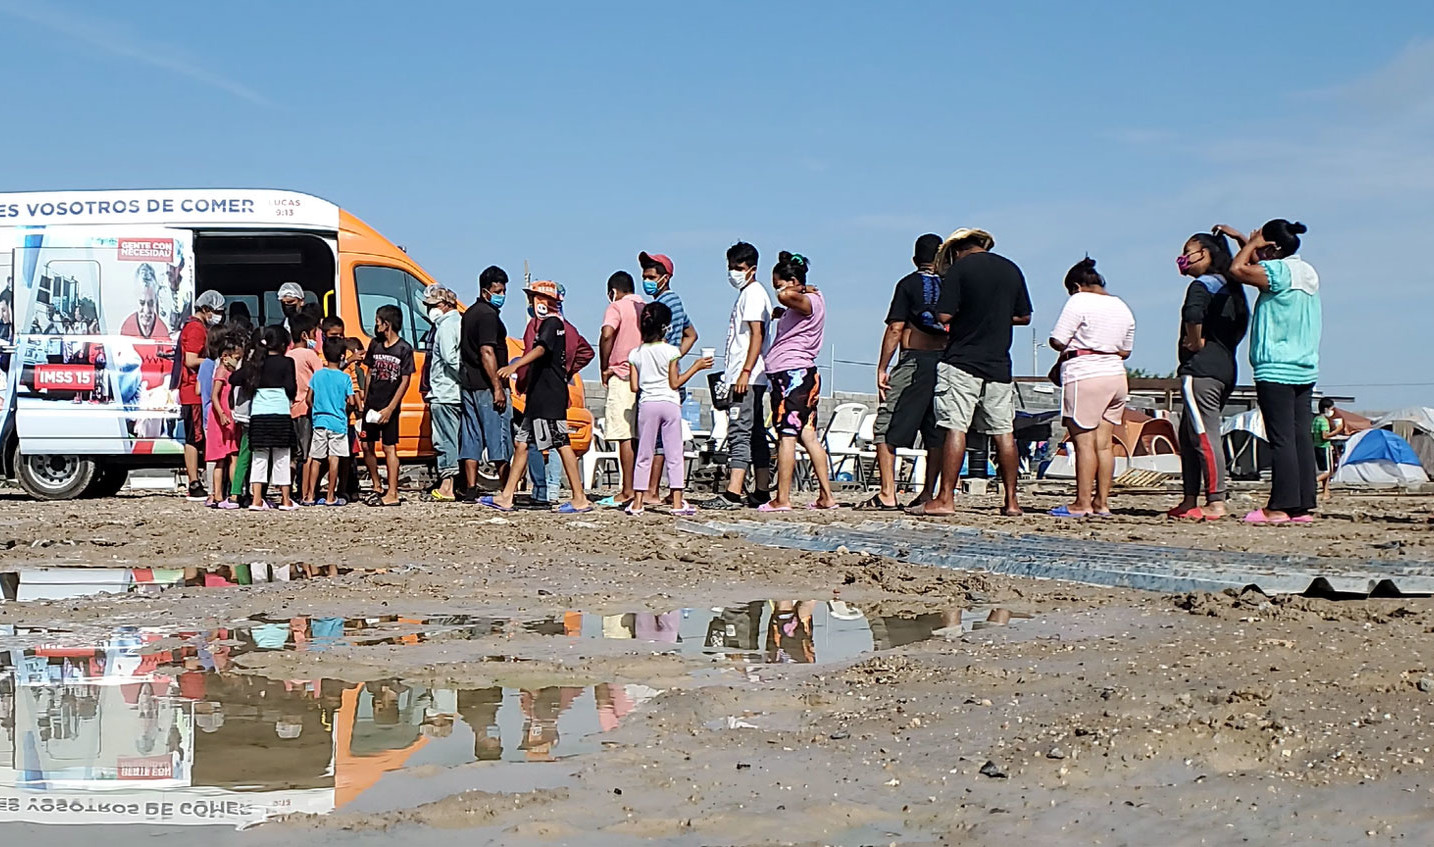 Line of people stand in muddy open space. Line leads to food donation van with side doors opened. Tents visible behind